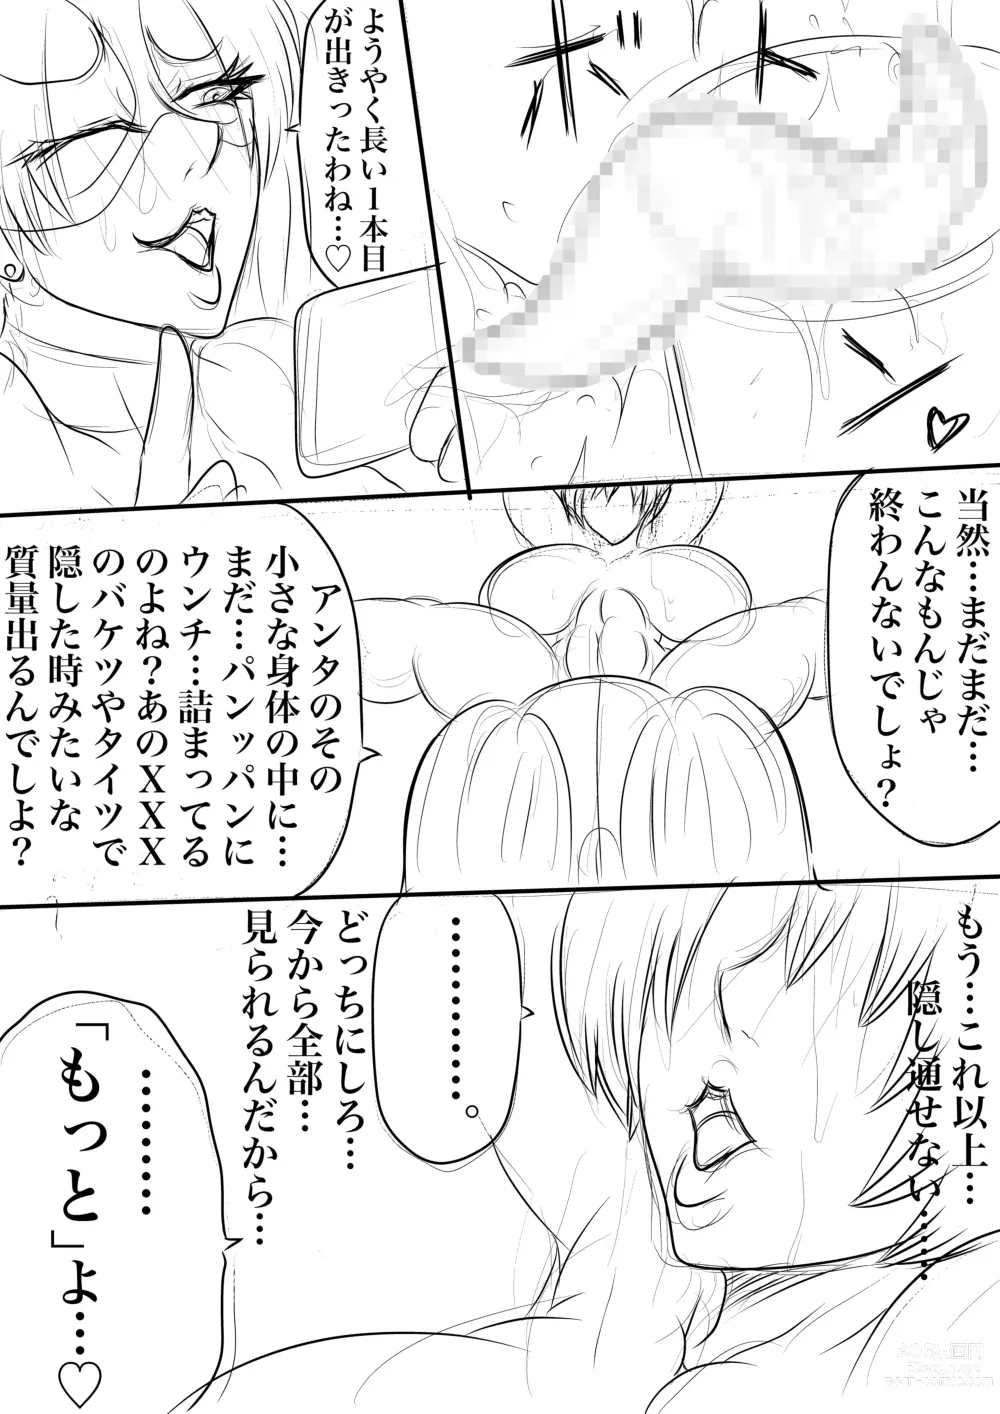 Page 11 of doujinshi BLOOM ROUND.15